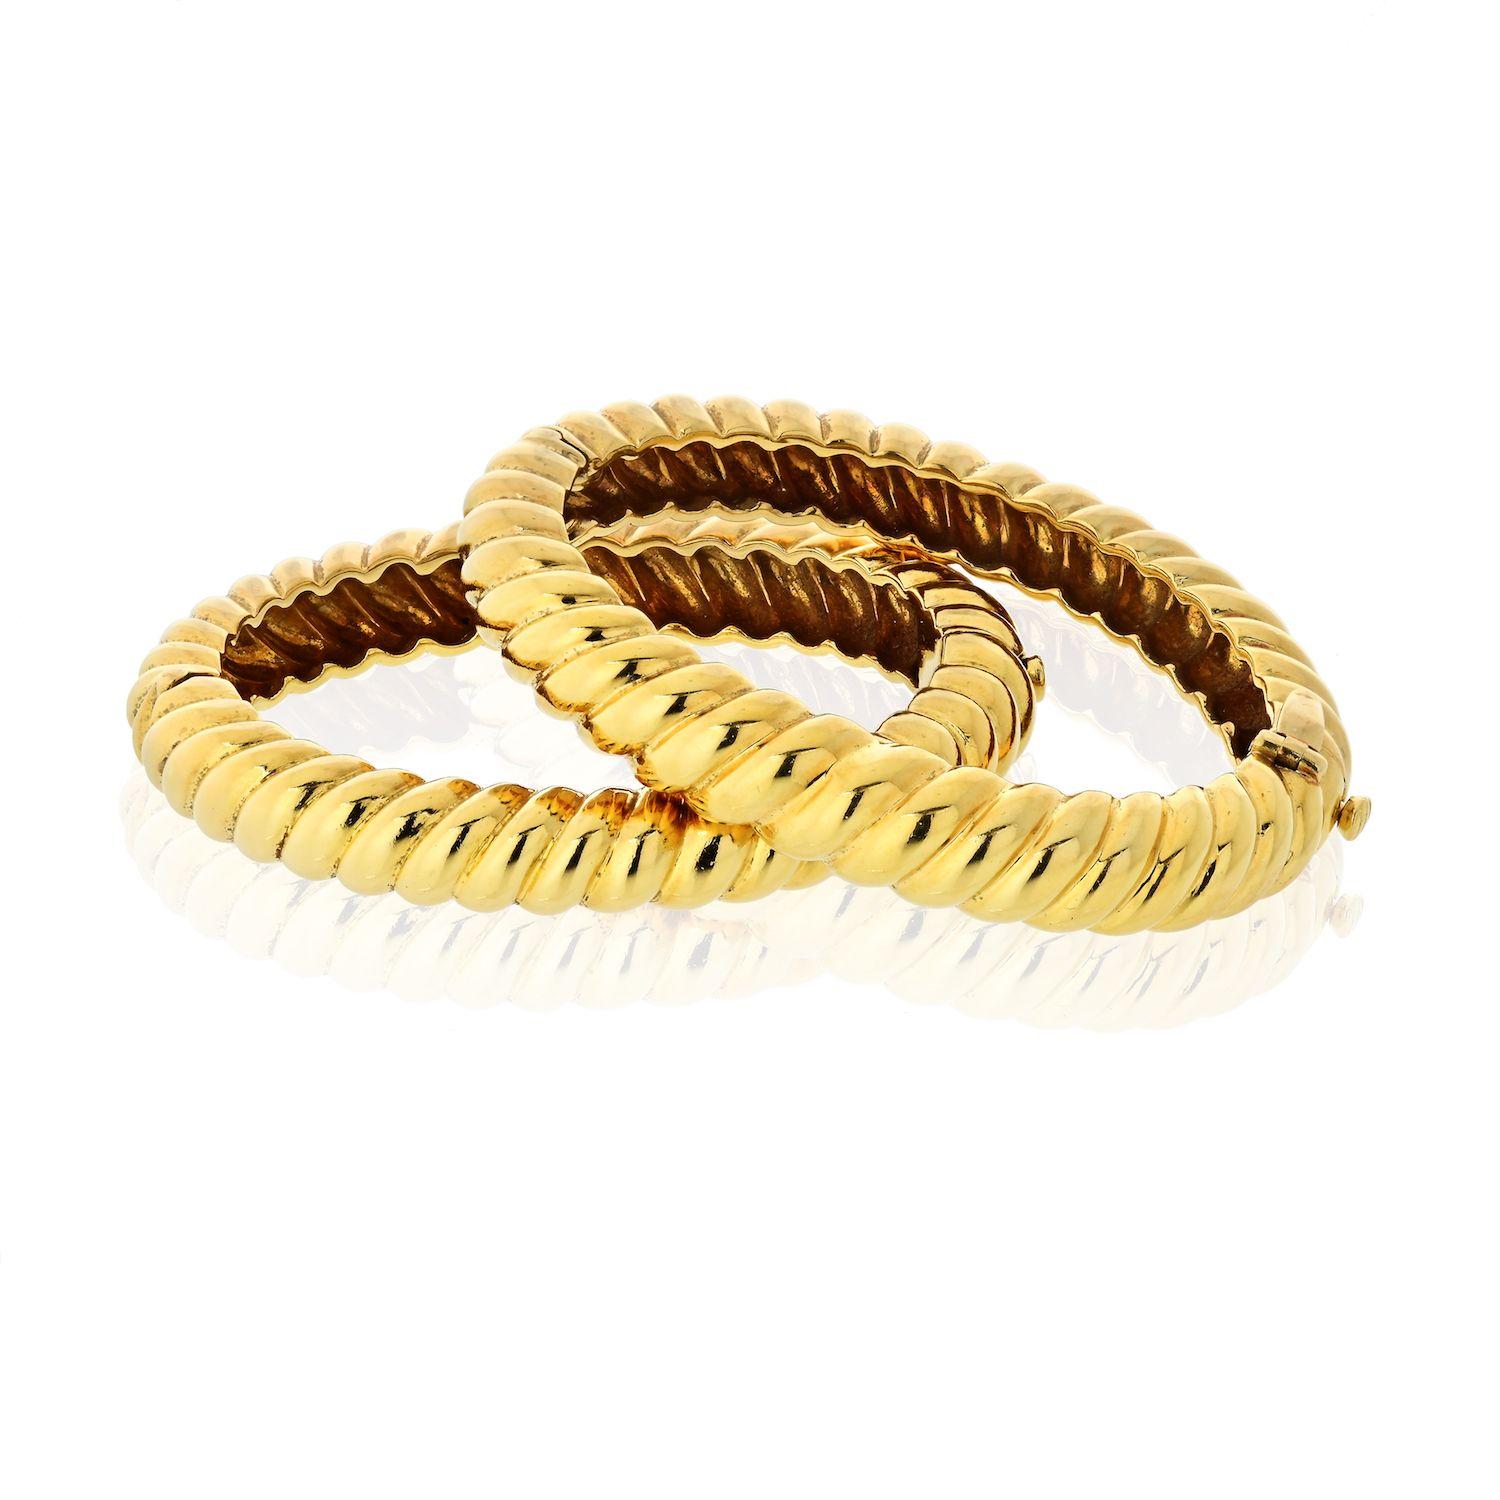 David Webb yellow gold matching bangle bracelets with hinged closures. Small size, best for wrist 5.5 inches to 5.75 inches. 
Priced for both. 
Hinged closure. 